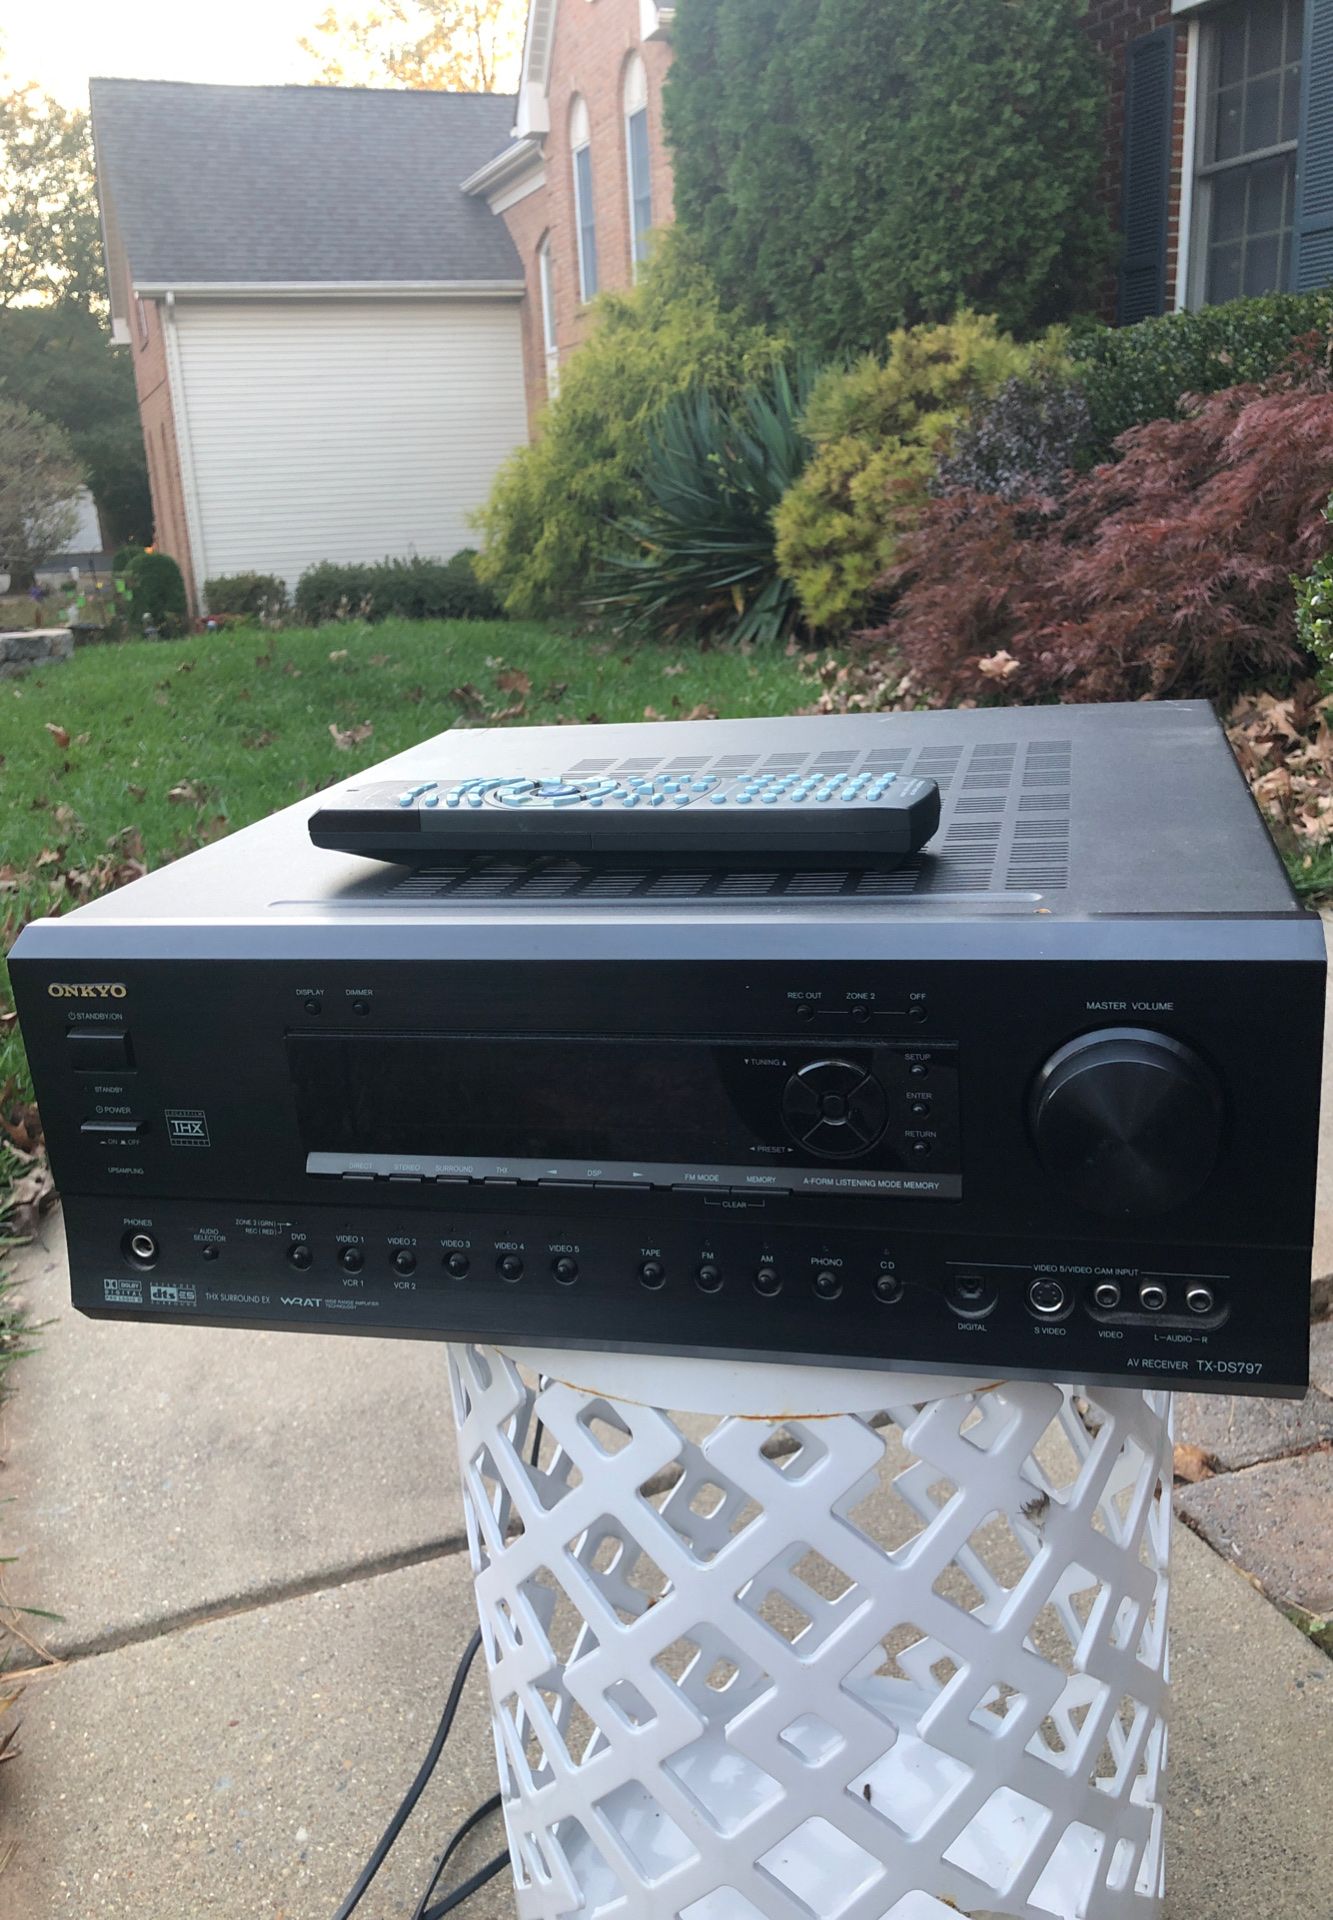 Onkyo TX-DS797 Black Home Theater THX 6.1-Ch AV Receiver. With remote control.